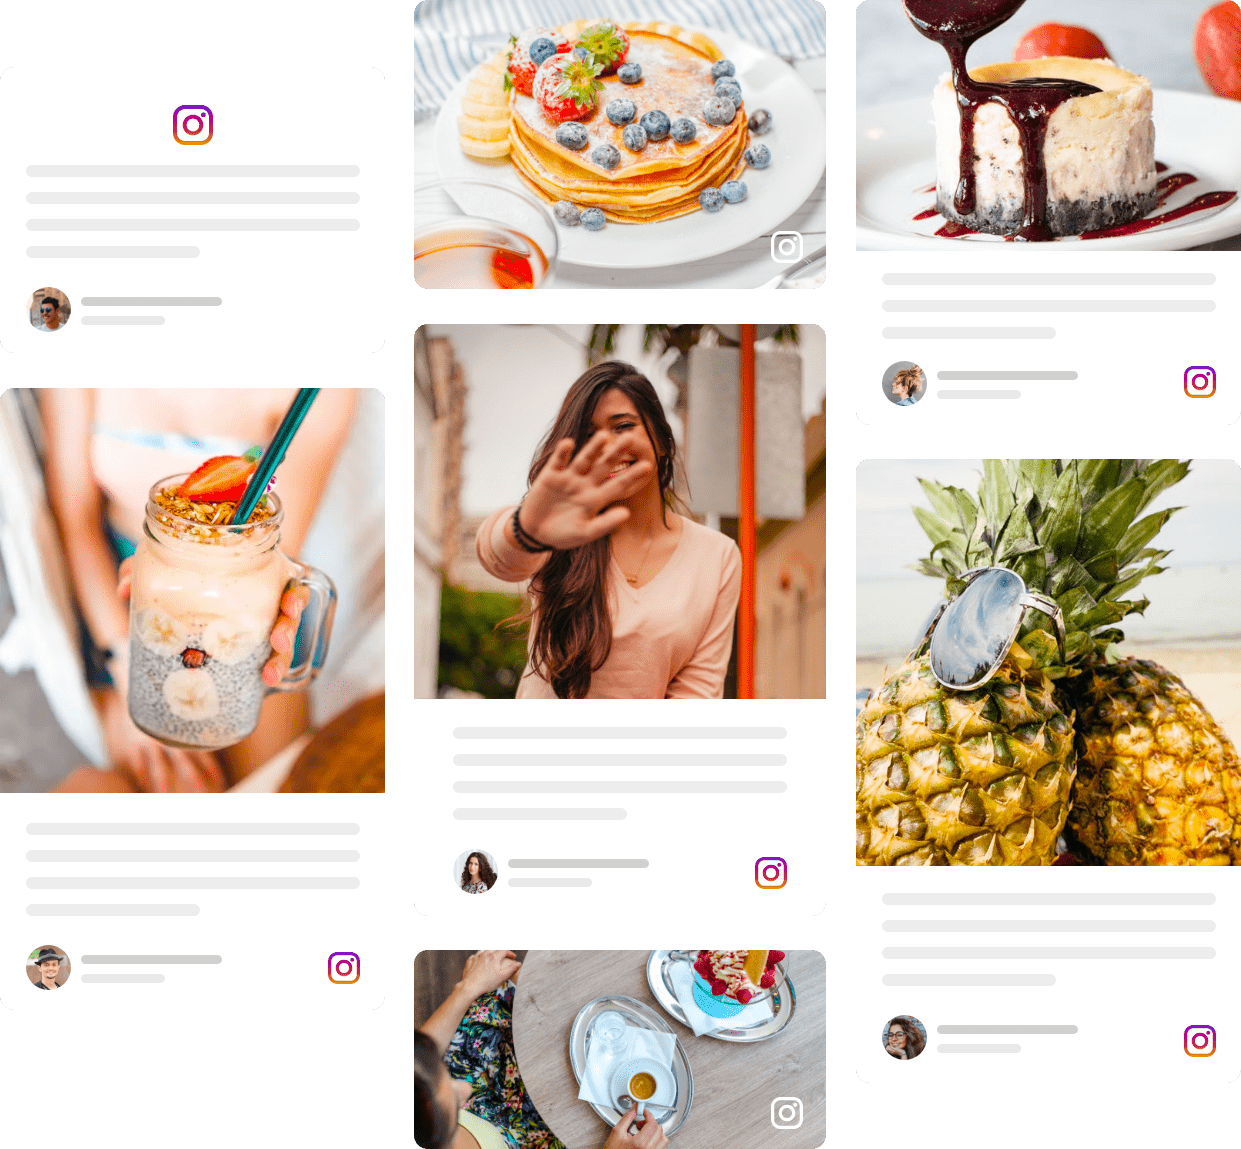 Instagram Wall - Best Instagram Wall For Events or Website